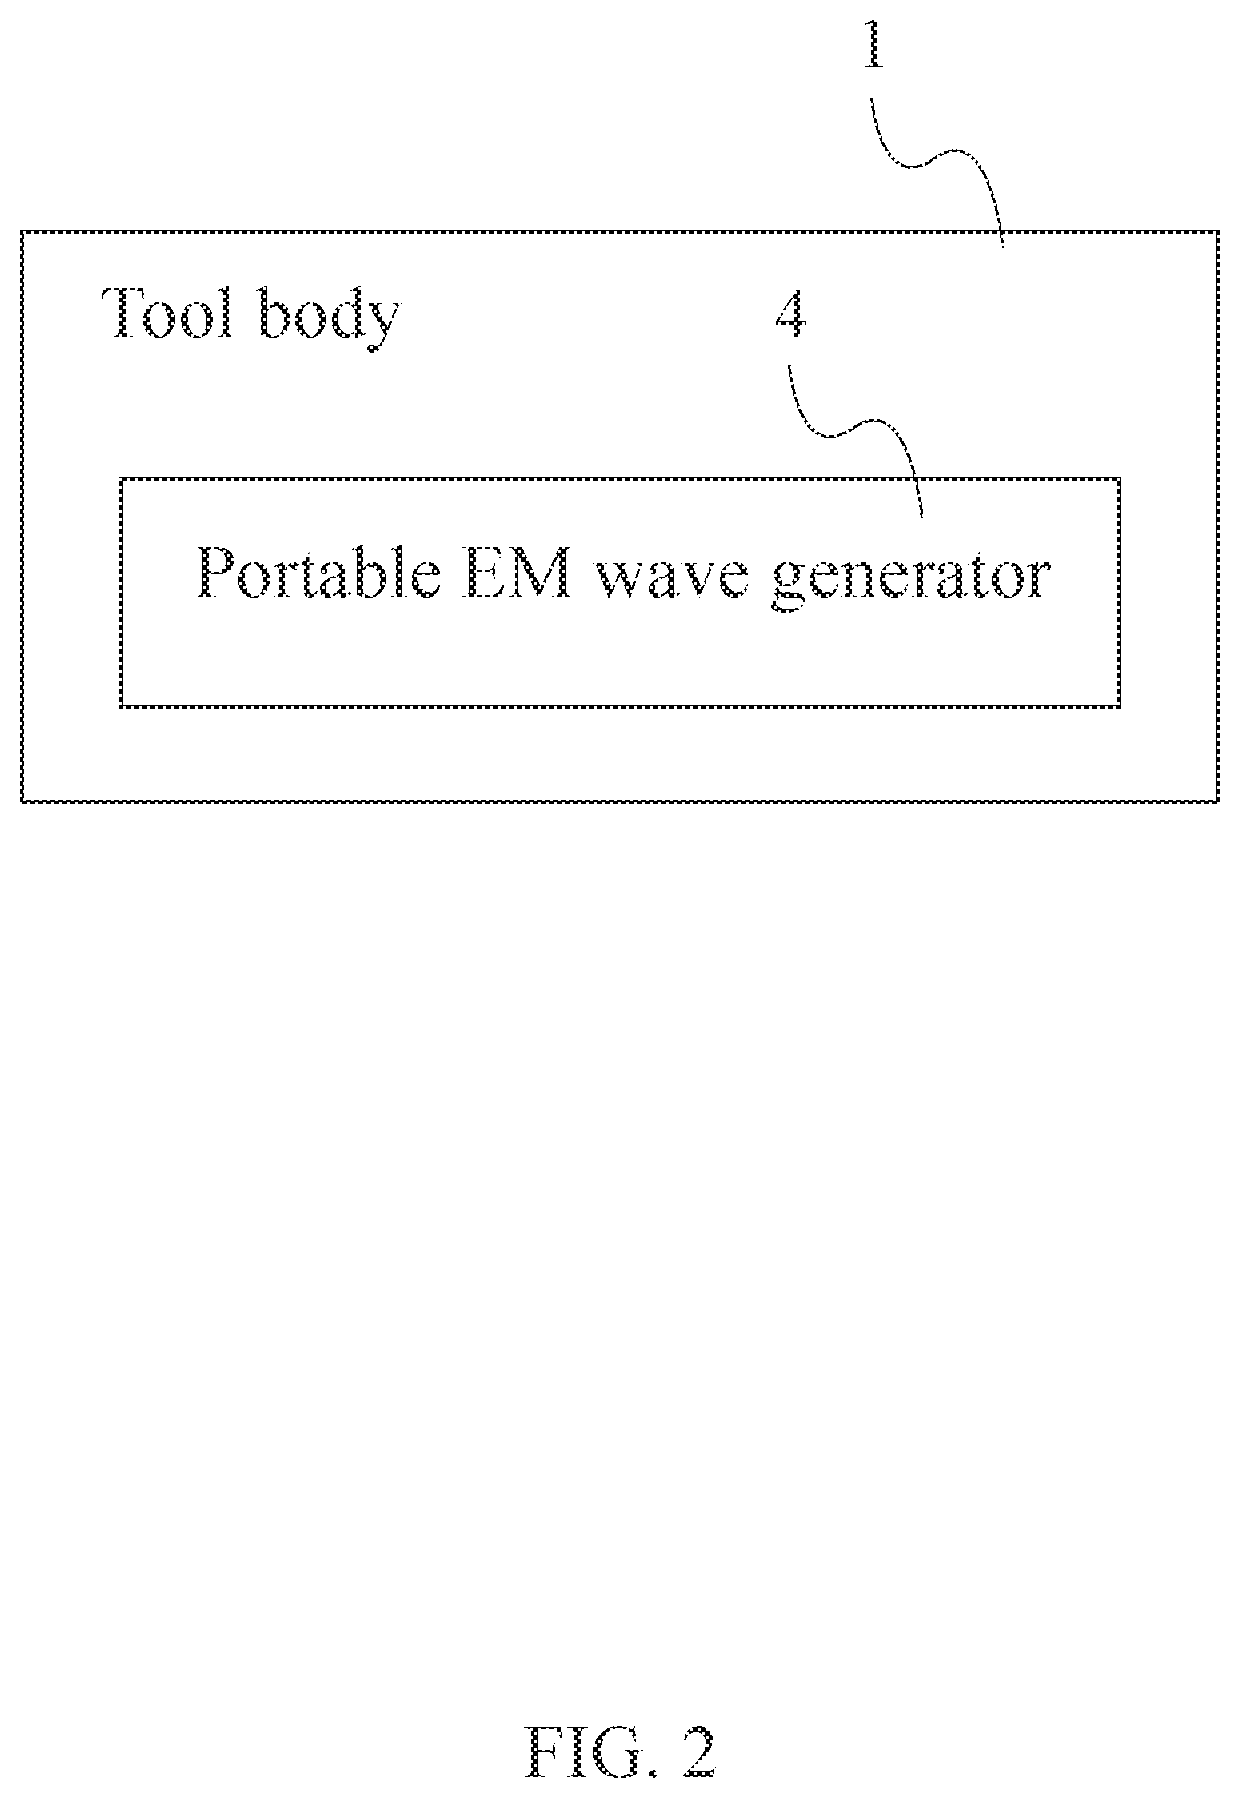 System and Method of Heating a Tool with Electromagnetic Radiation